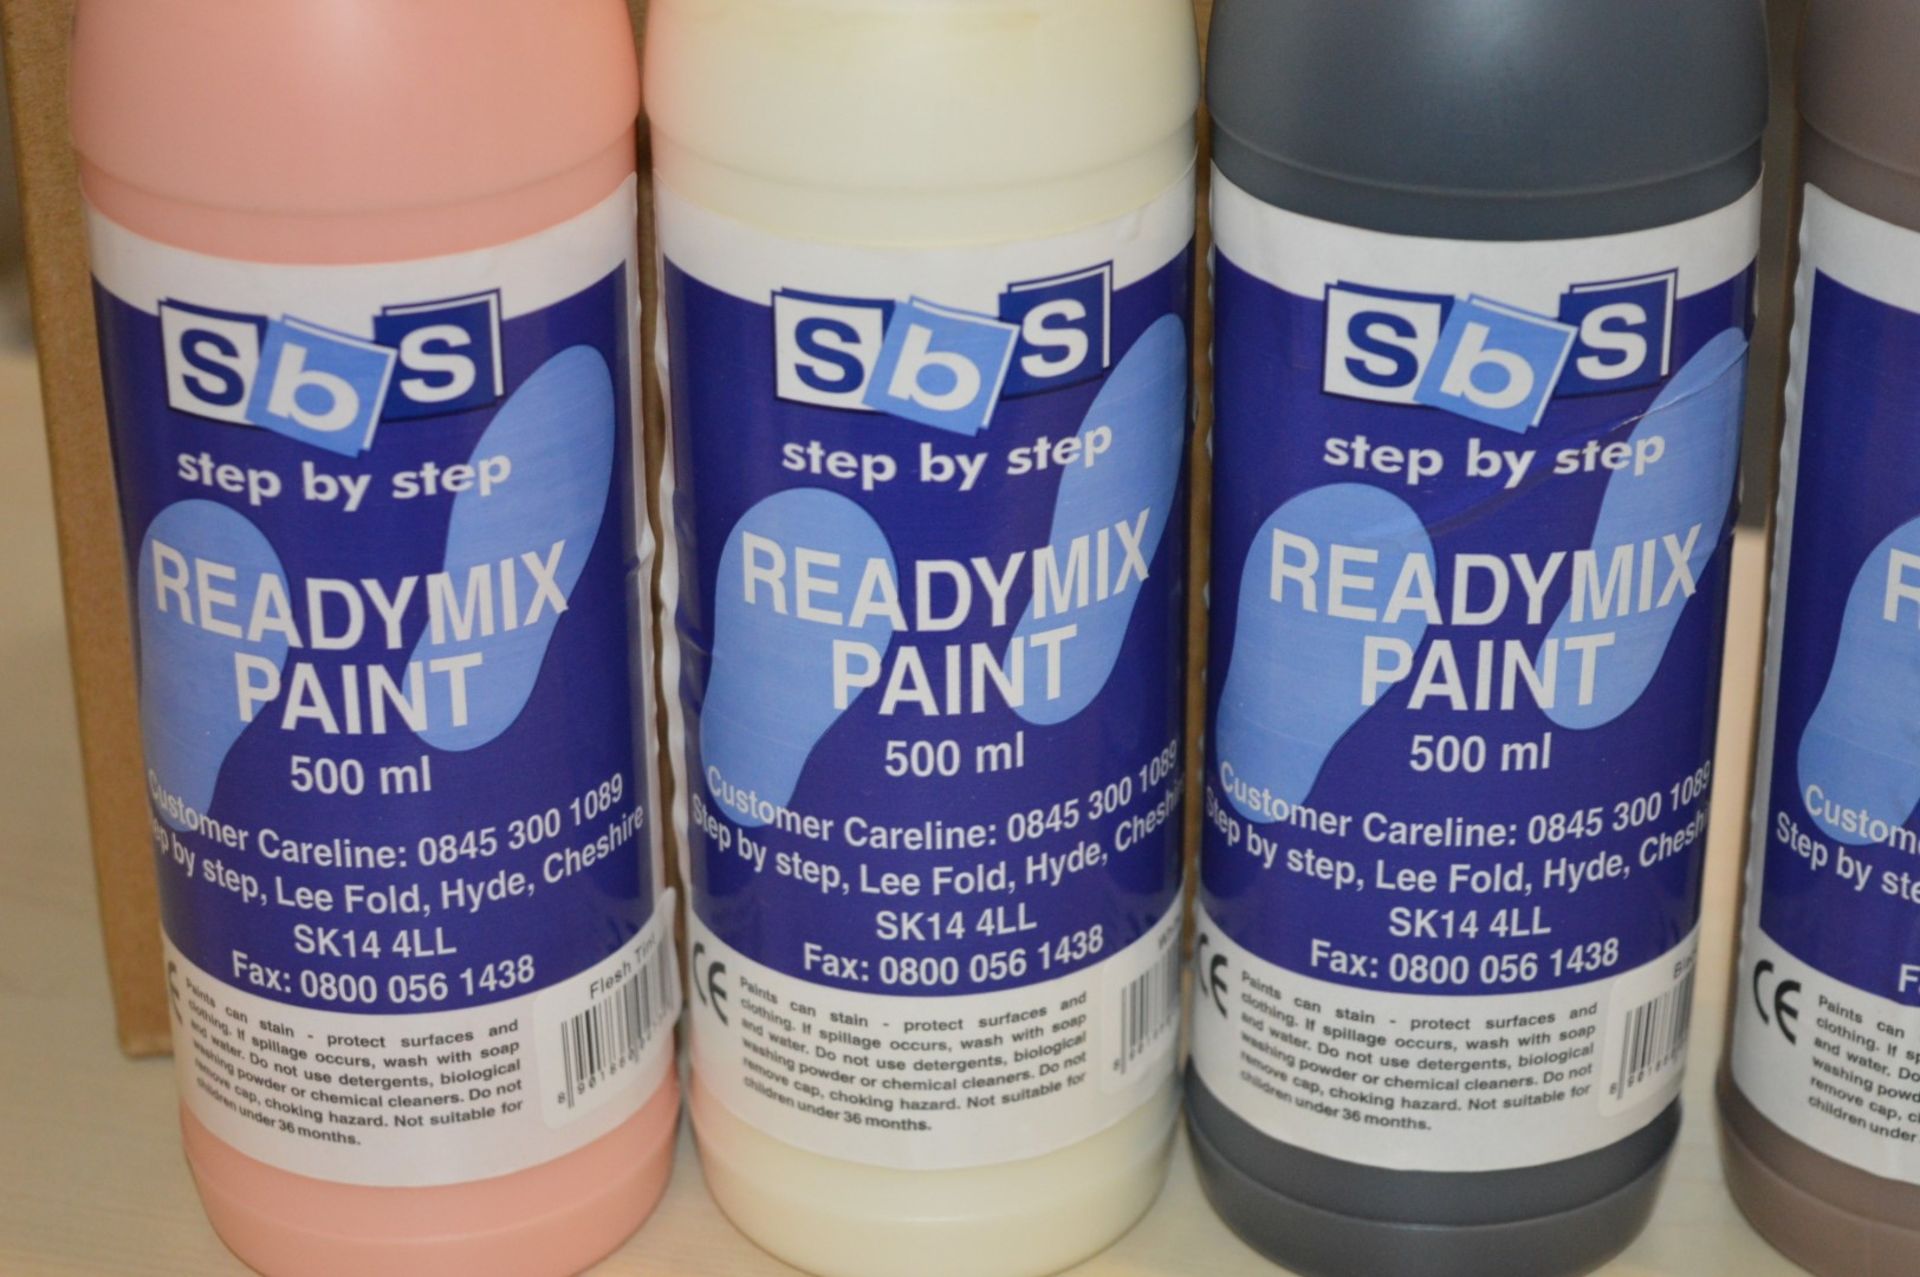 6 x Sets of SBS Step by Step Readymix Paint - 36 x 500ml Bottles - 6 x Sets of 6 Bottles - Unused - Image 7 of 8